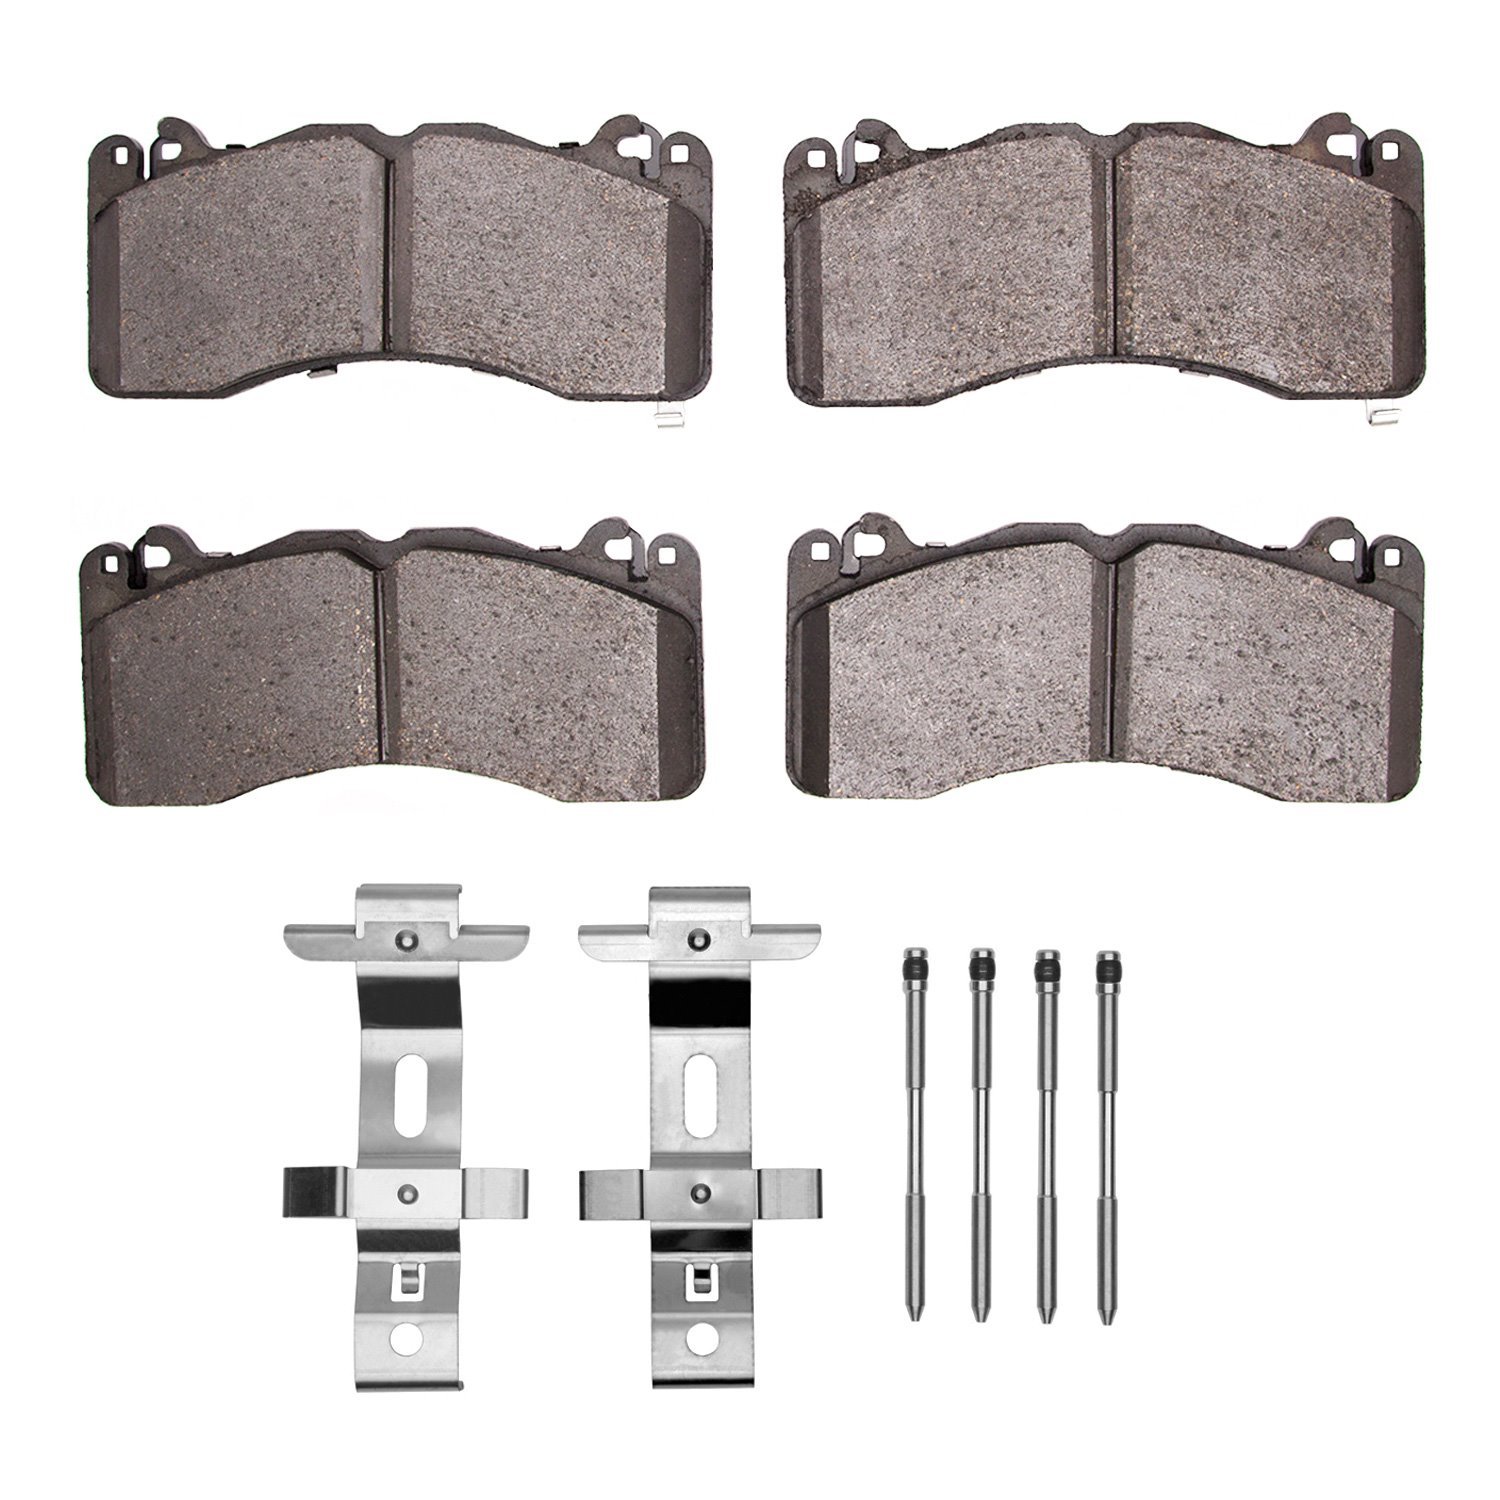 1551-1792-01 5000 Advanced Low-Metallic Brake Pads & Hardware Kit, Fits Select Ford/Lincoln/Mercury/Mazda, Position: Front